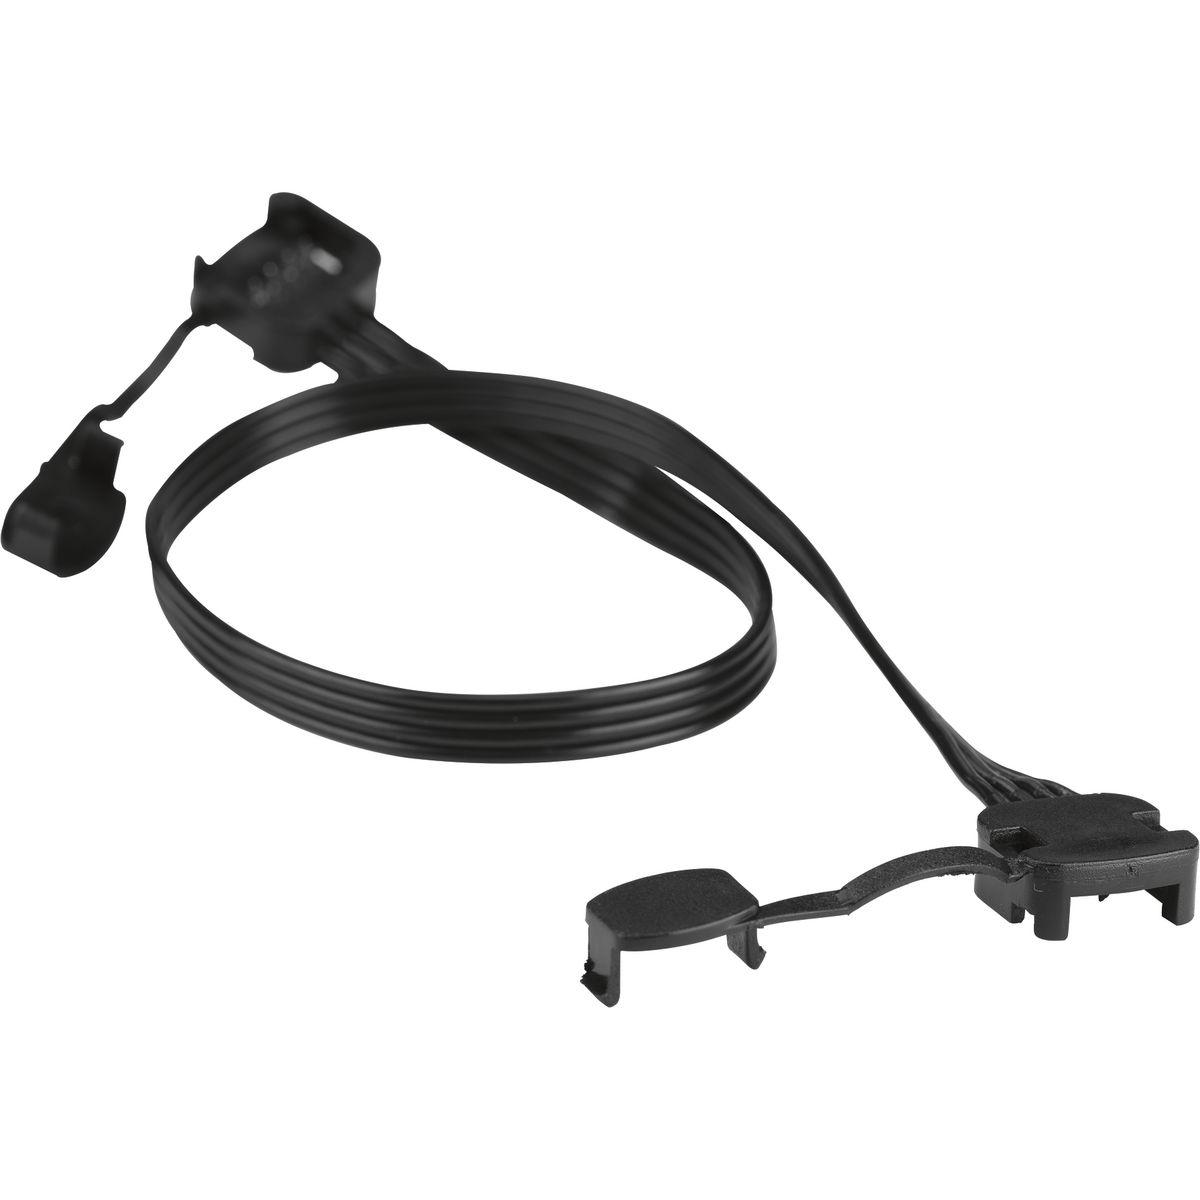 Hubbell P700012-000 Progress Lighting offers a wide variety of accessories from the LED Tape Light Undercabinet System for customized layouts. The 12” connector cords join multiple sections of LED tape to allow for flexibility in design for undercabinet systems. The connecto